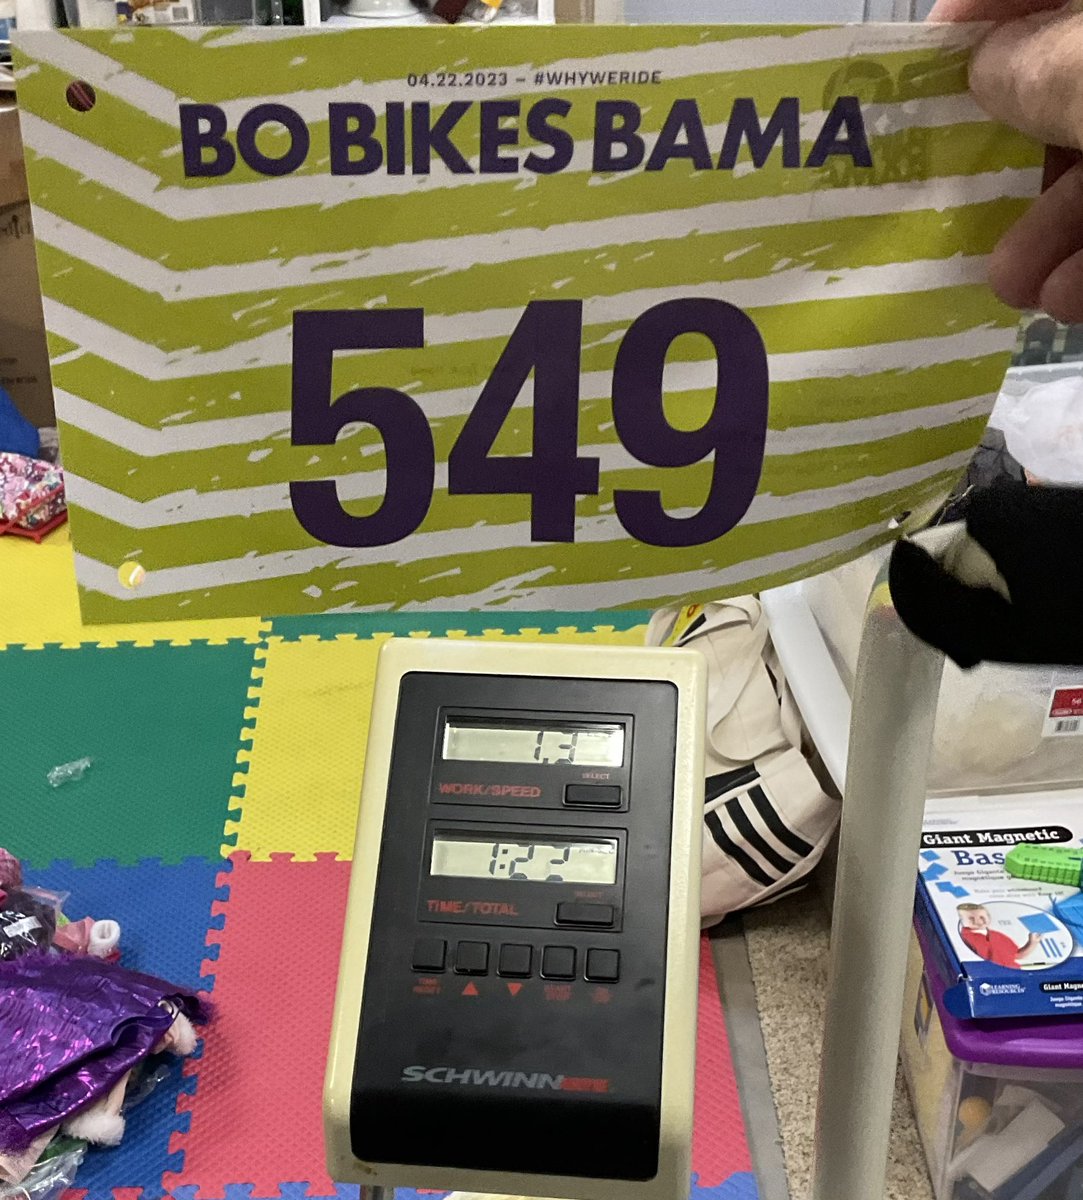 And we’re off on an exciting (virtual) ride thru Alabama with Bo Jackson #bobikesbama ##whyweride #oldandslowKPT